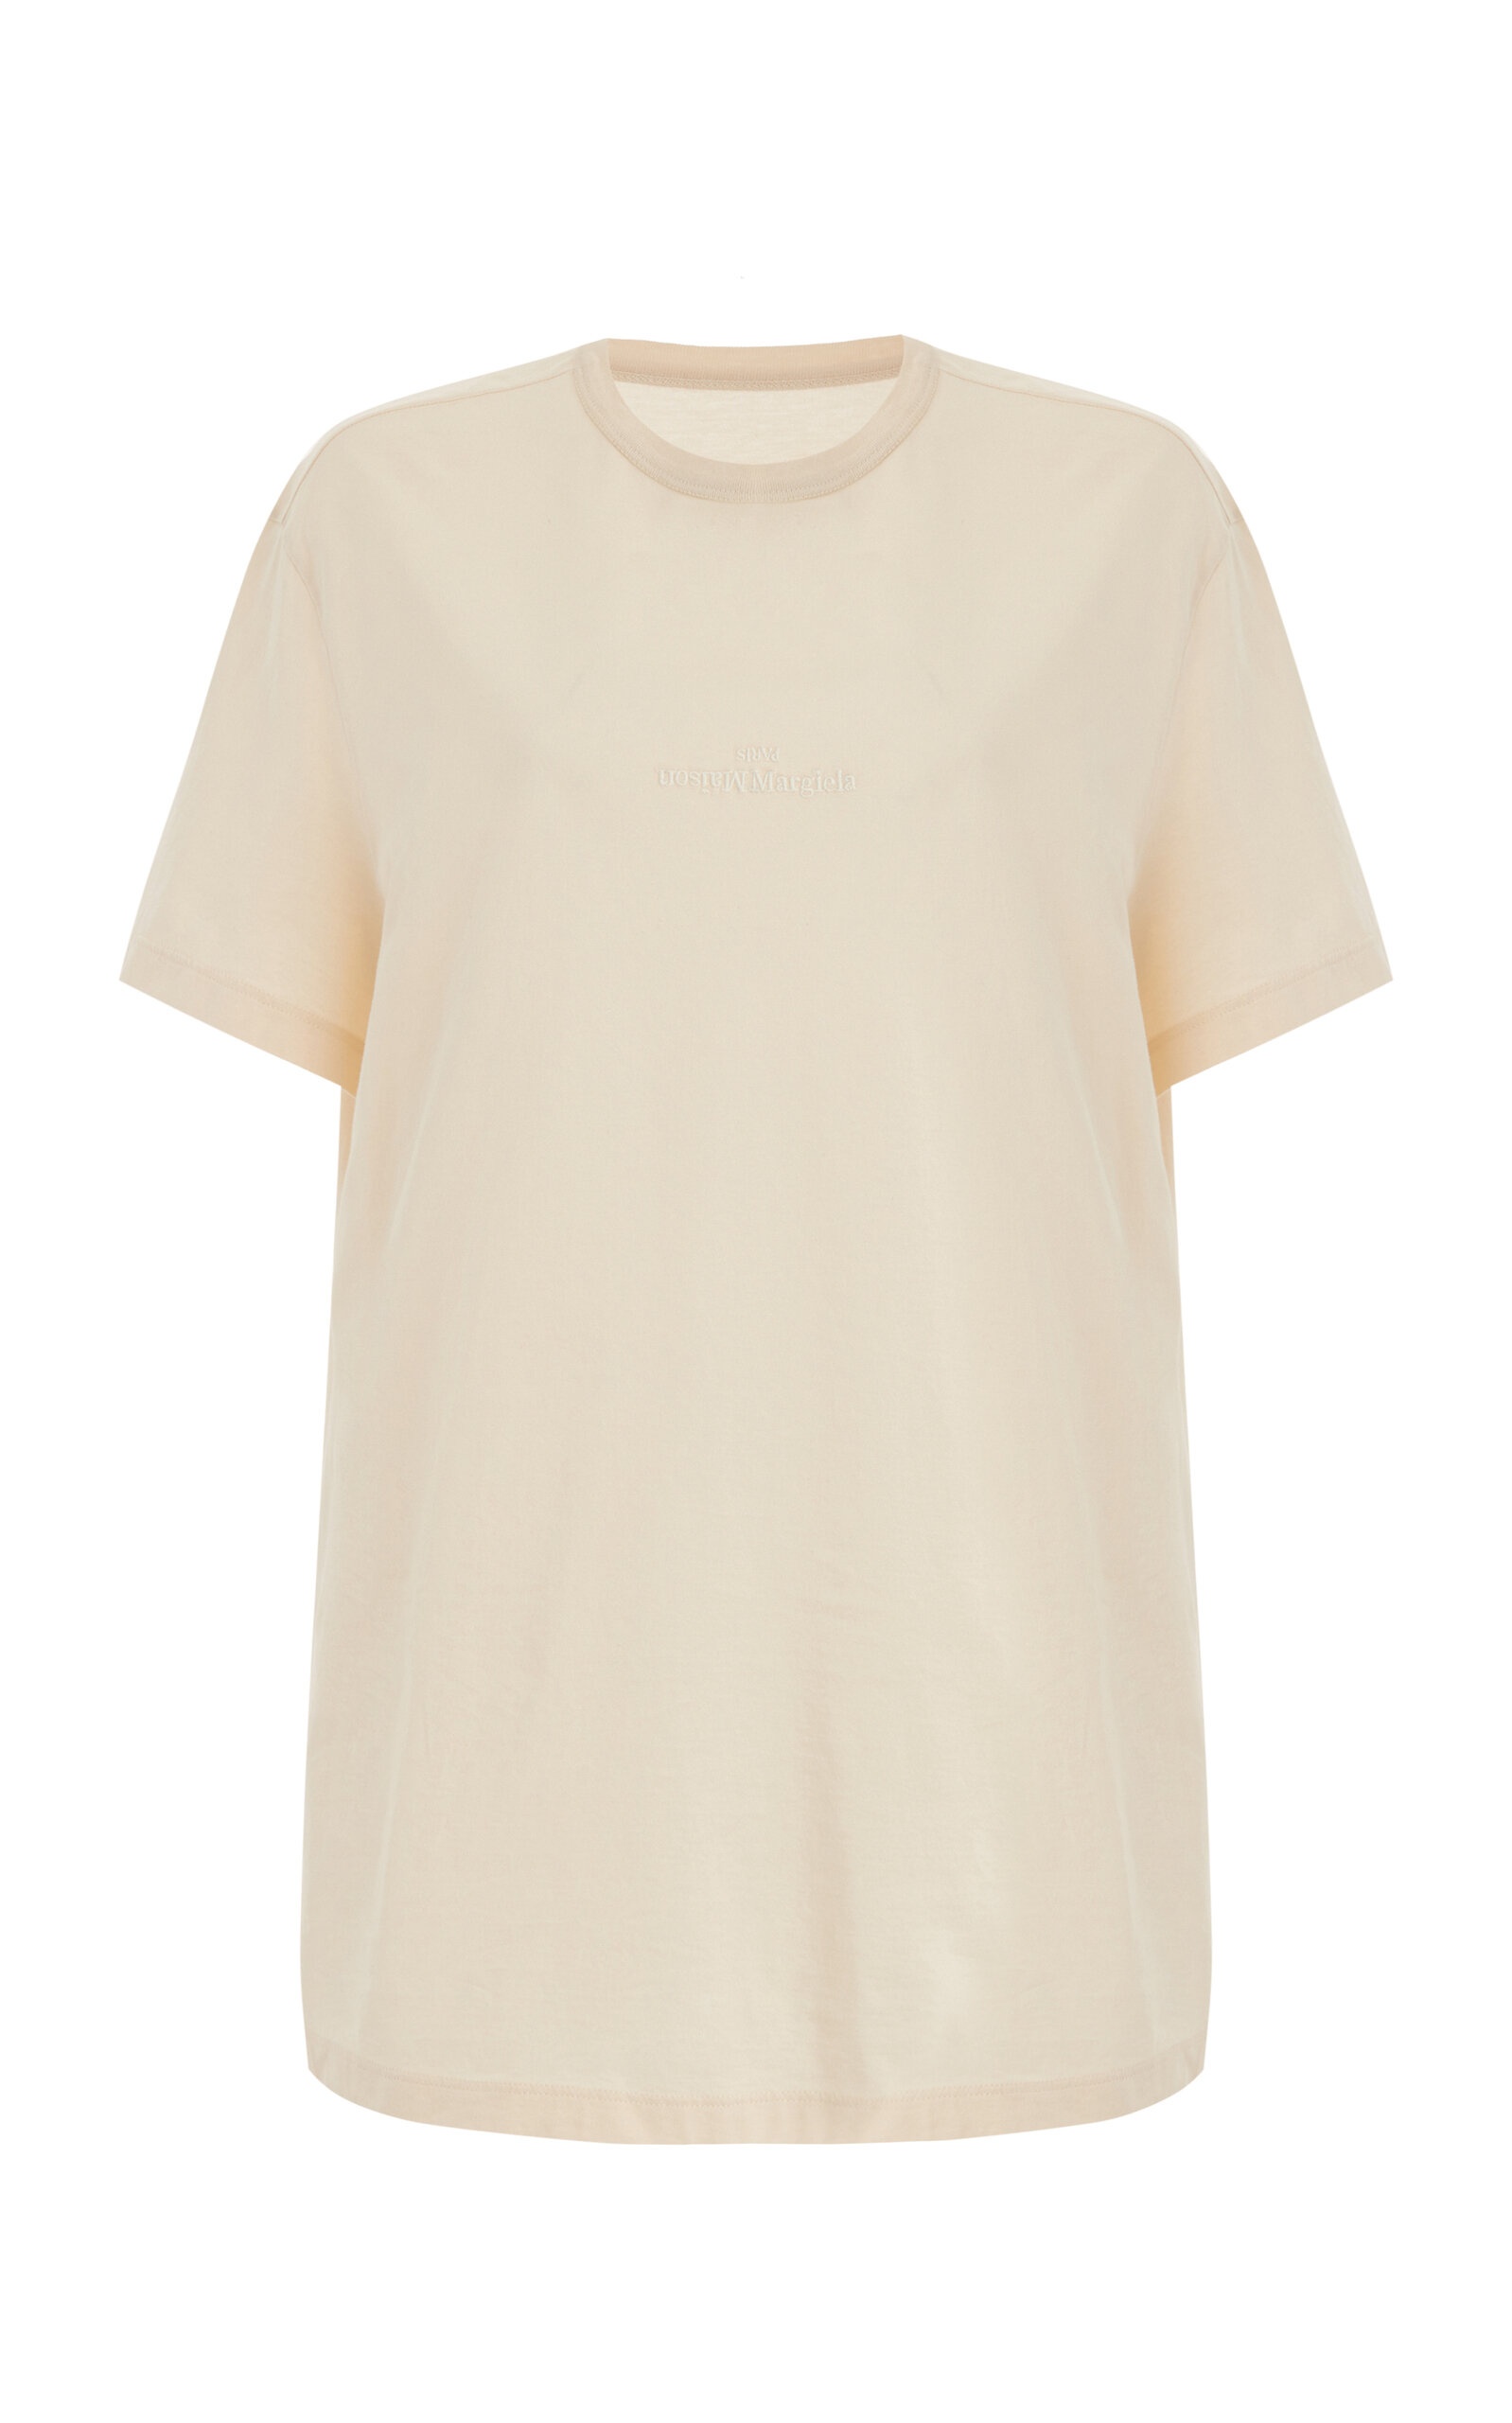 Embroidered Cotton T-Shirt ivory - 1